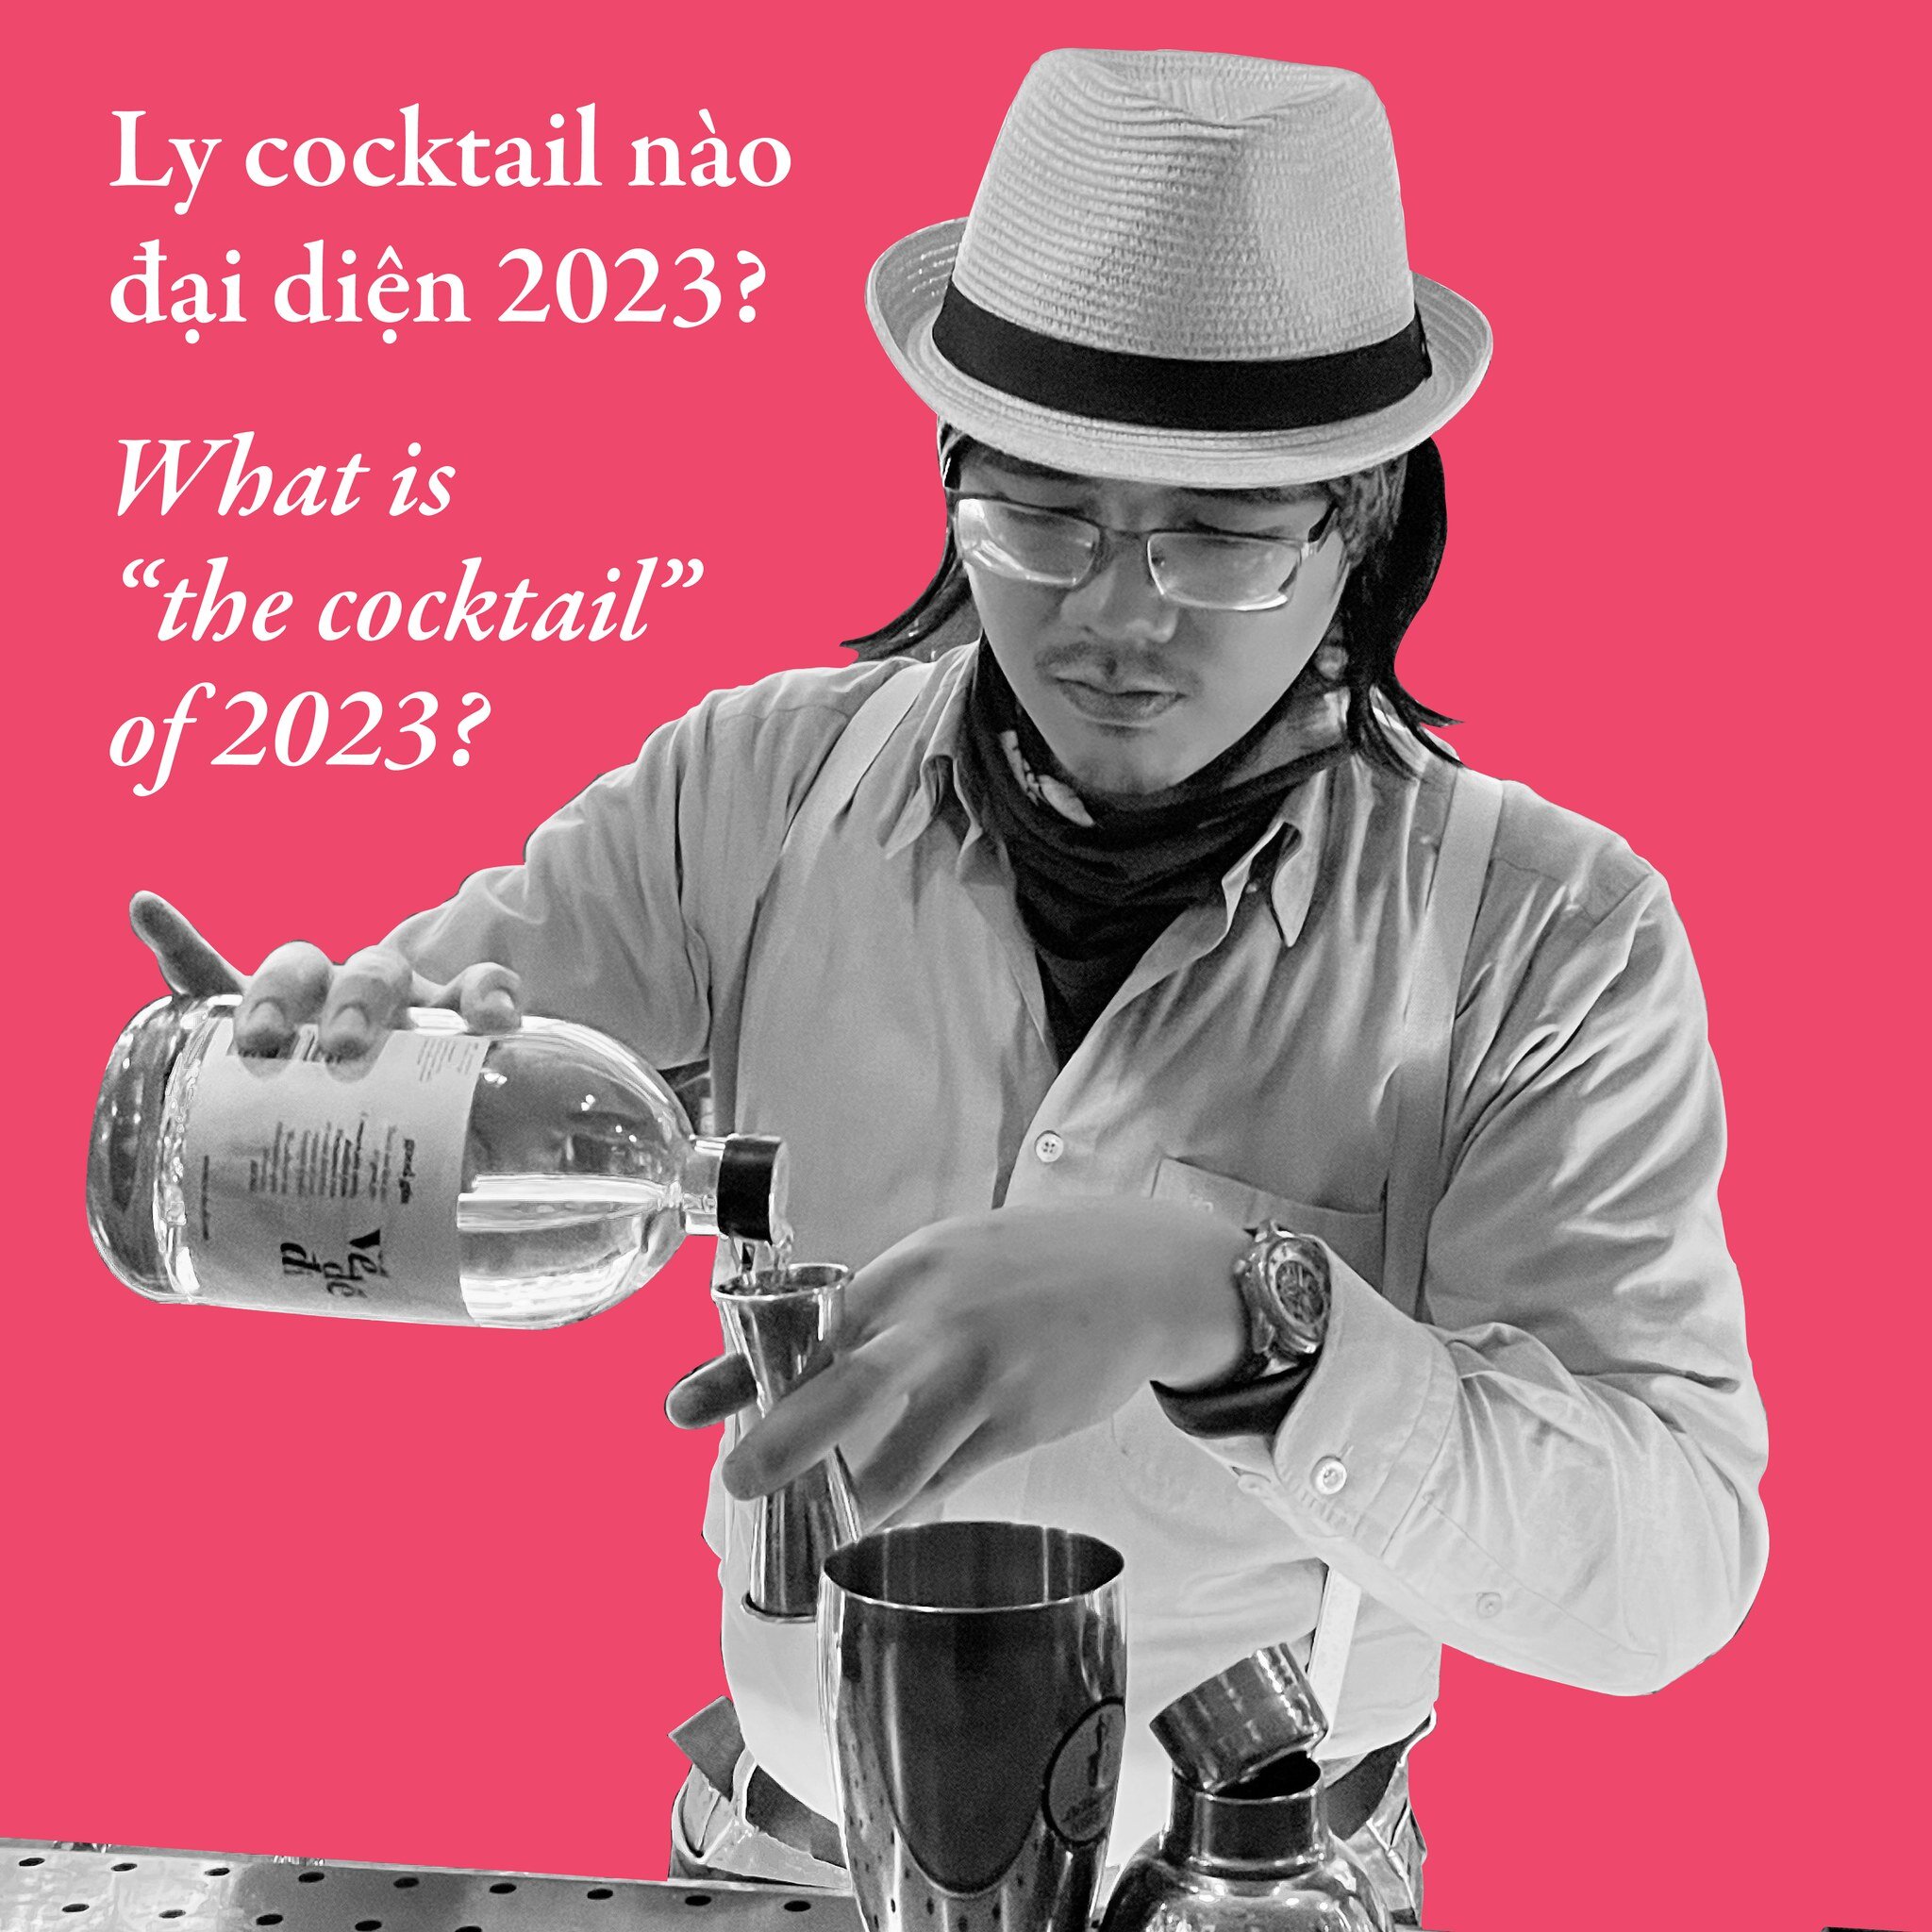 A seasoned bartender, Kh&aacute;nh loves recommending new and unknown drinks for patrons to get them out their comfort zone. We decided to pick his brain about what cocktail does he think is &quot;the cocktail&quot; of 2023.

&quot;It would be a clas